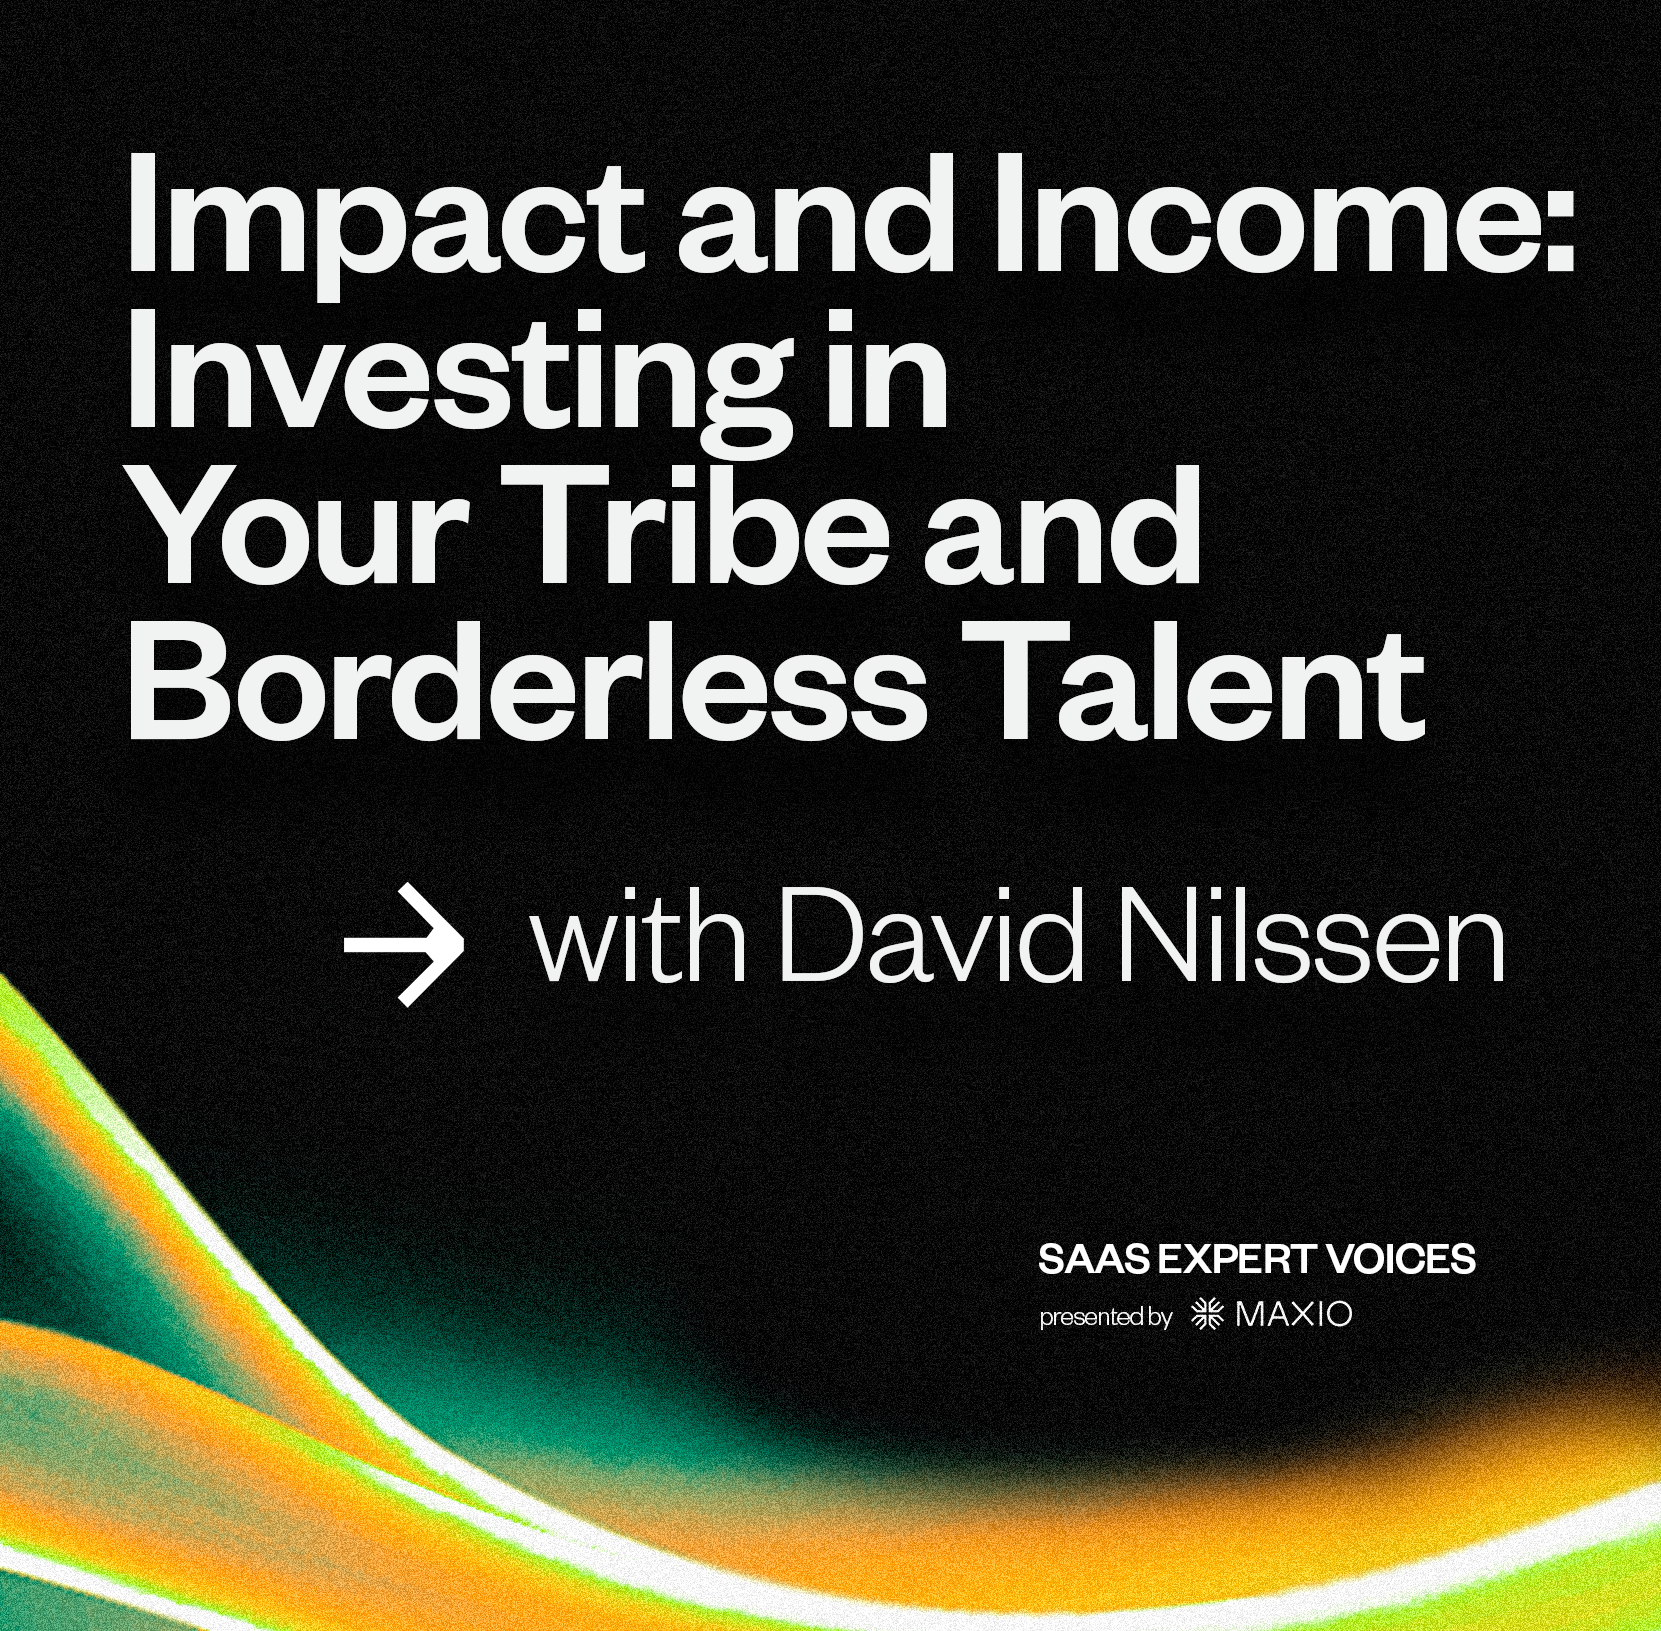 This week on the Expert Voices podcast, Randy Wootton, CEO of Maxio, speaks with David Nilssen, CEO of DOXA Talent, and a forerunner of revolutionizing how businesses think about and engage with borderless talent. Randy and David take a look at the intricacies of borderless talent acquisition and the attributes that contribute to the success of a CEO in today's ever-evolving SaaS landscape. They discuss how purpose-driven approaches to outsourcing can bring about positive global change and how talent scarcity, remote work, offshoring, and AI integration are altering the business world permanently. David also talks about the value of peer groups and why you need to invest in your tribe. 